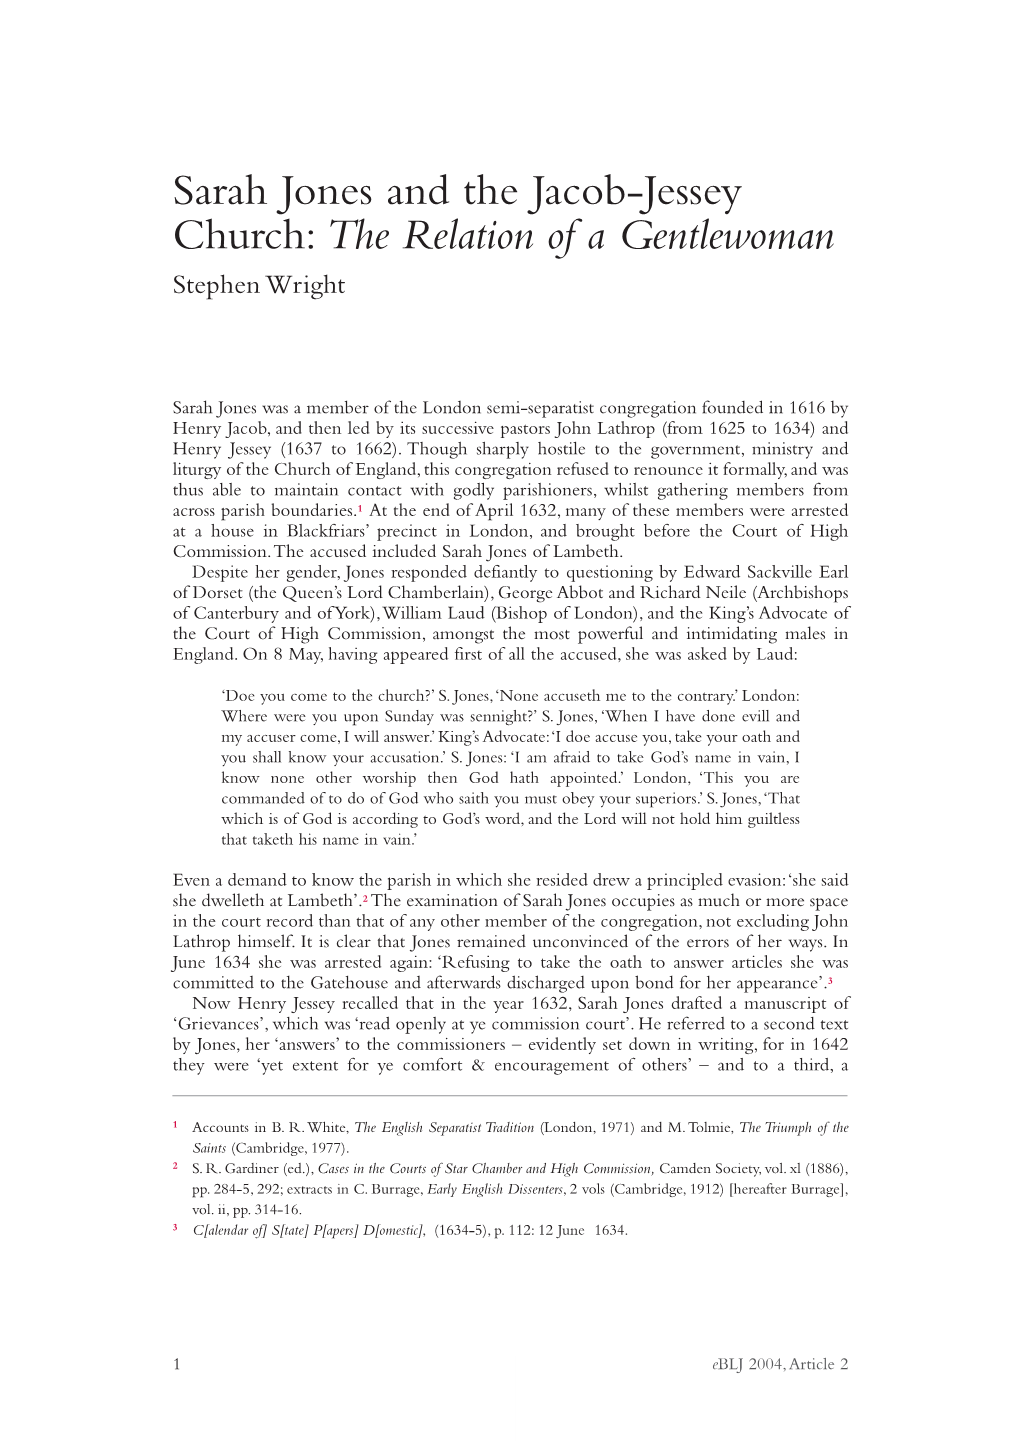 Sarah Jones and the Jacob-Jessey Church: the Relation of a Gentlewoman Stephen Wright